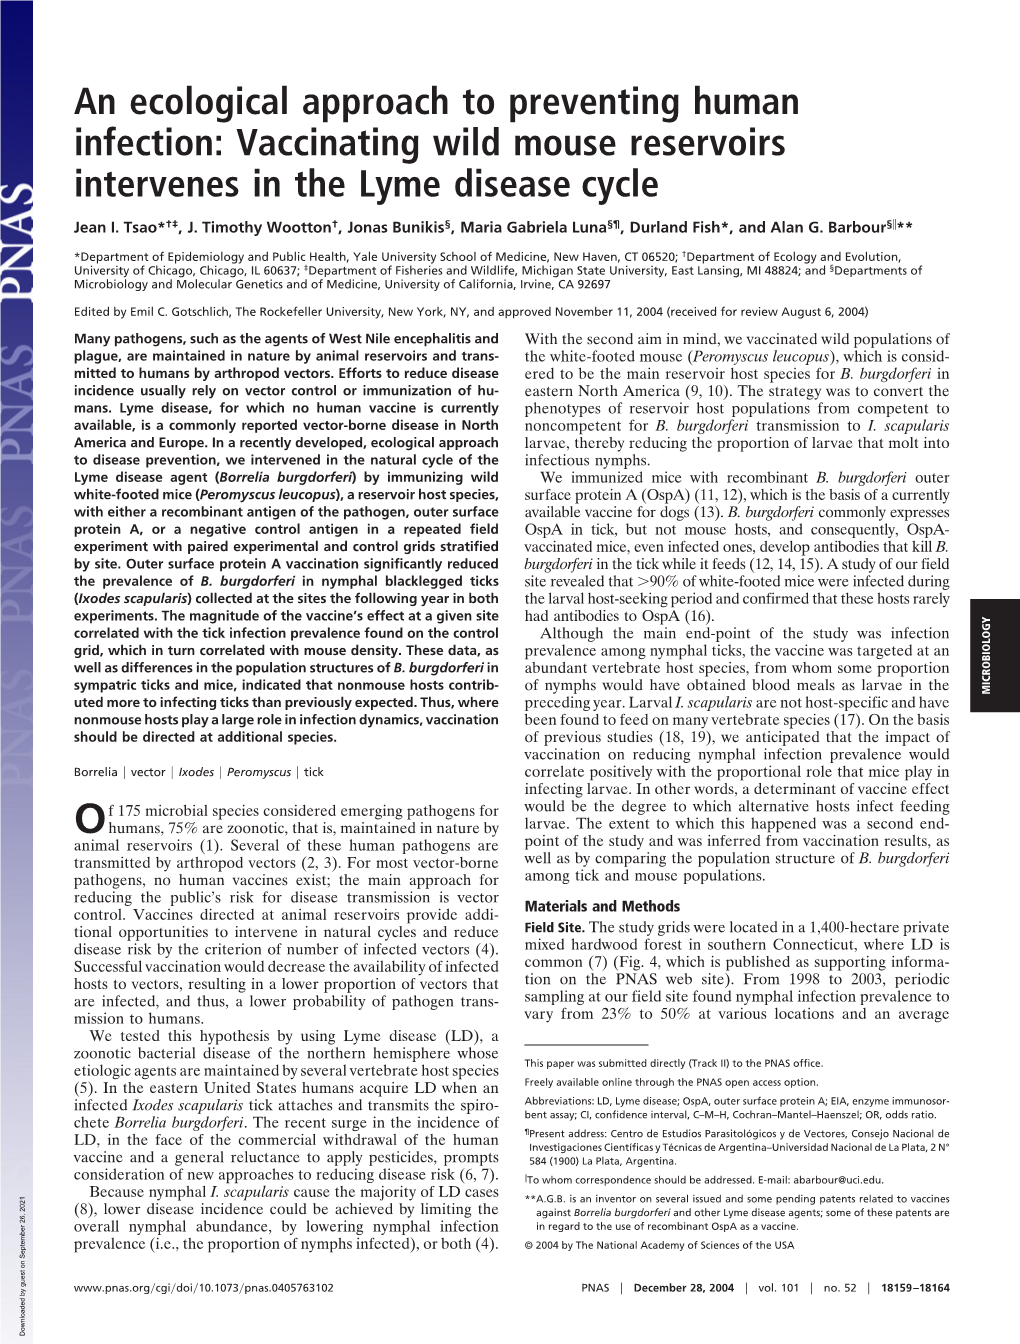 An Ecological Approach to Preventing Human Infection: Vaccinating Wild Mouse Reservoirs Intervenes in the Lyme Disease Cycle